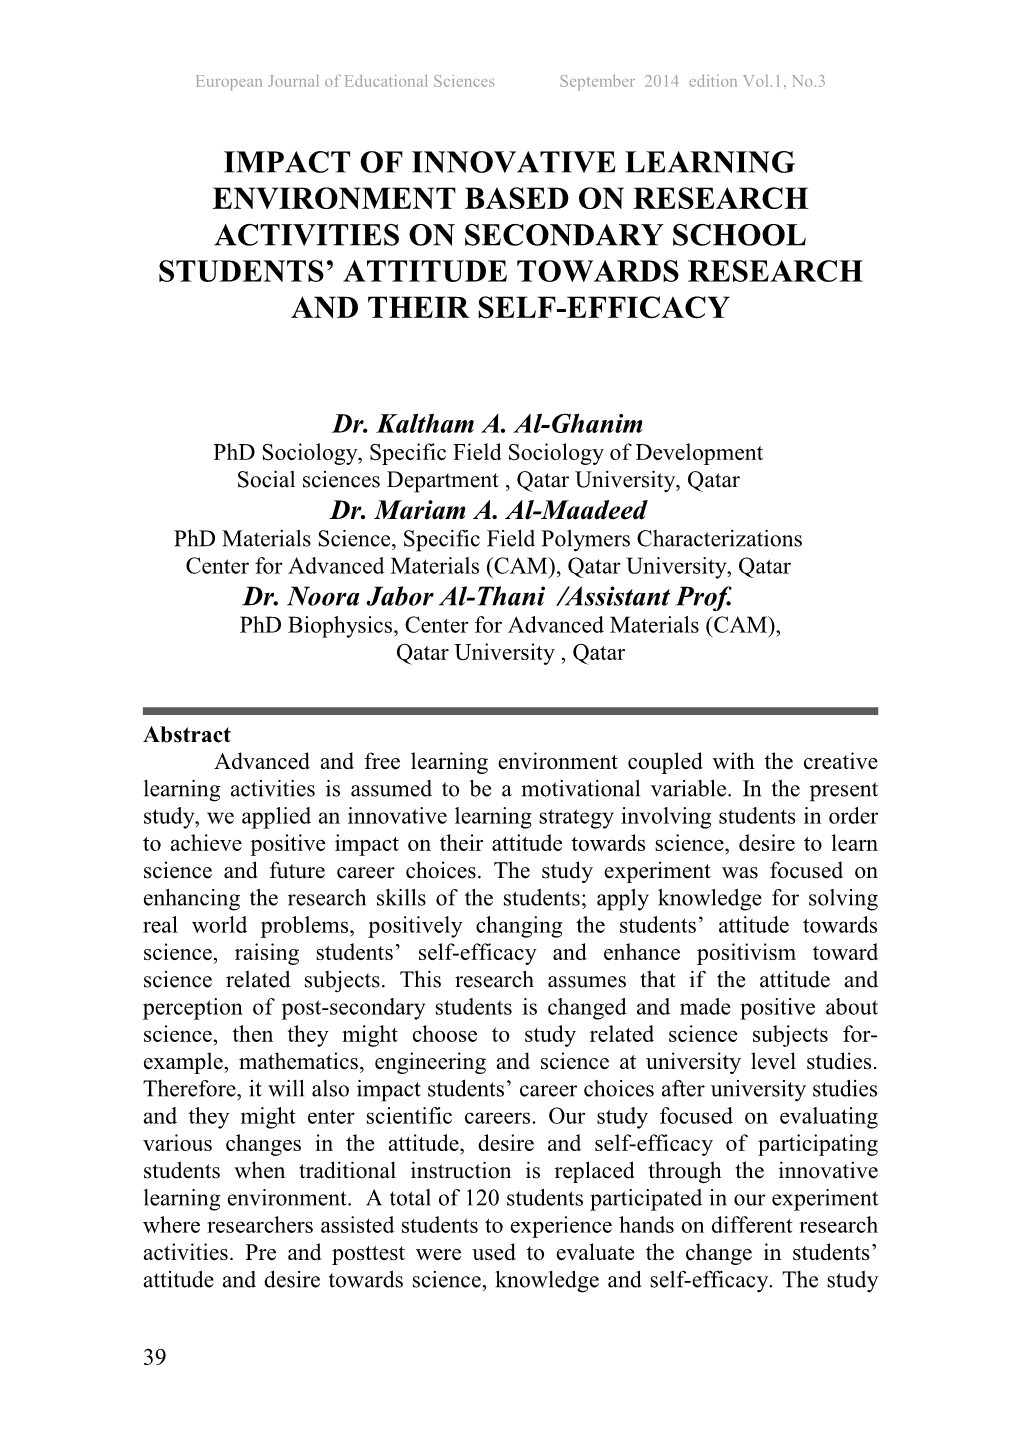 Impact of innovative learning environment based on research activities on secondary school students’ attitude towards research and their self-efficacy